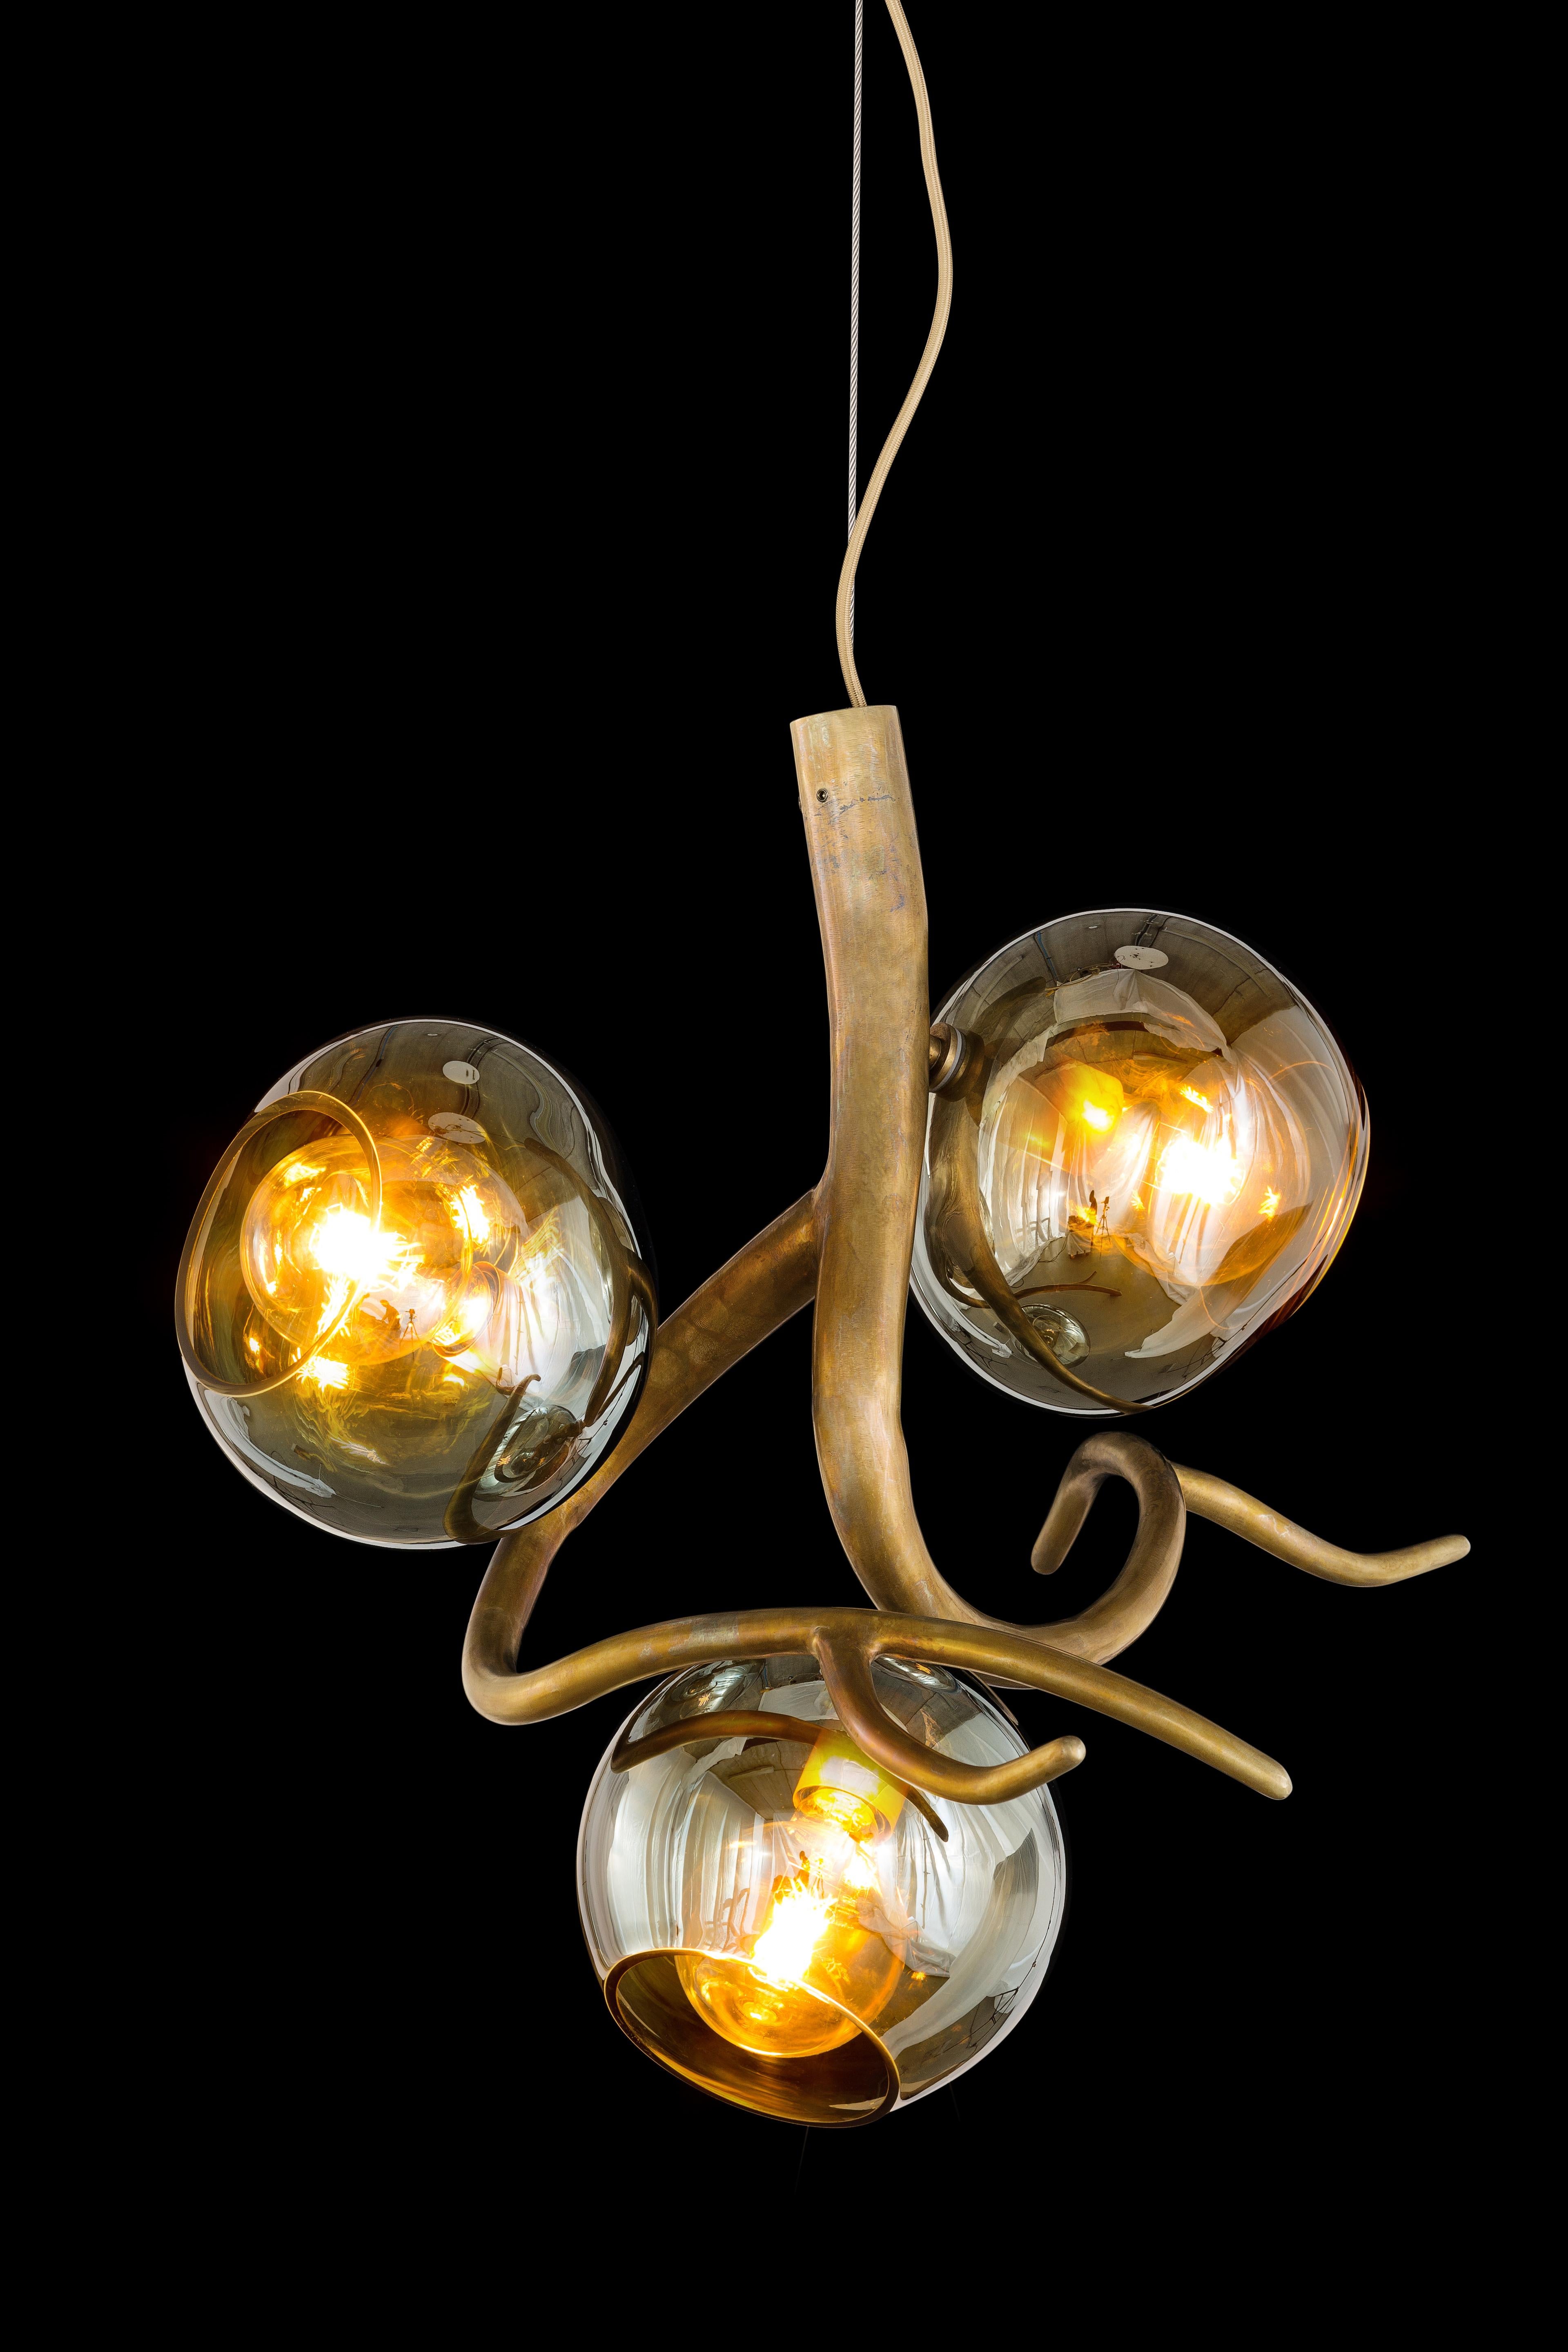 Named after the ancient Greek Goddess of dew, this Ersa modern pendant in a brass finish with iridescent glass spheres offers light with a sculptural touch for every possible position or space. The Ersa pendant is available with one, two, or three